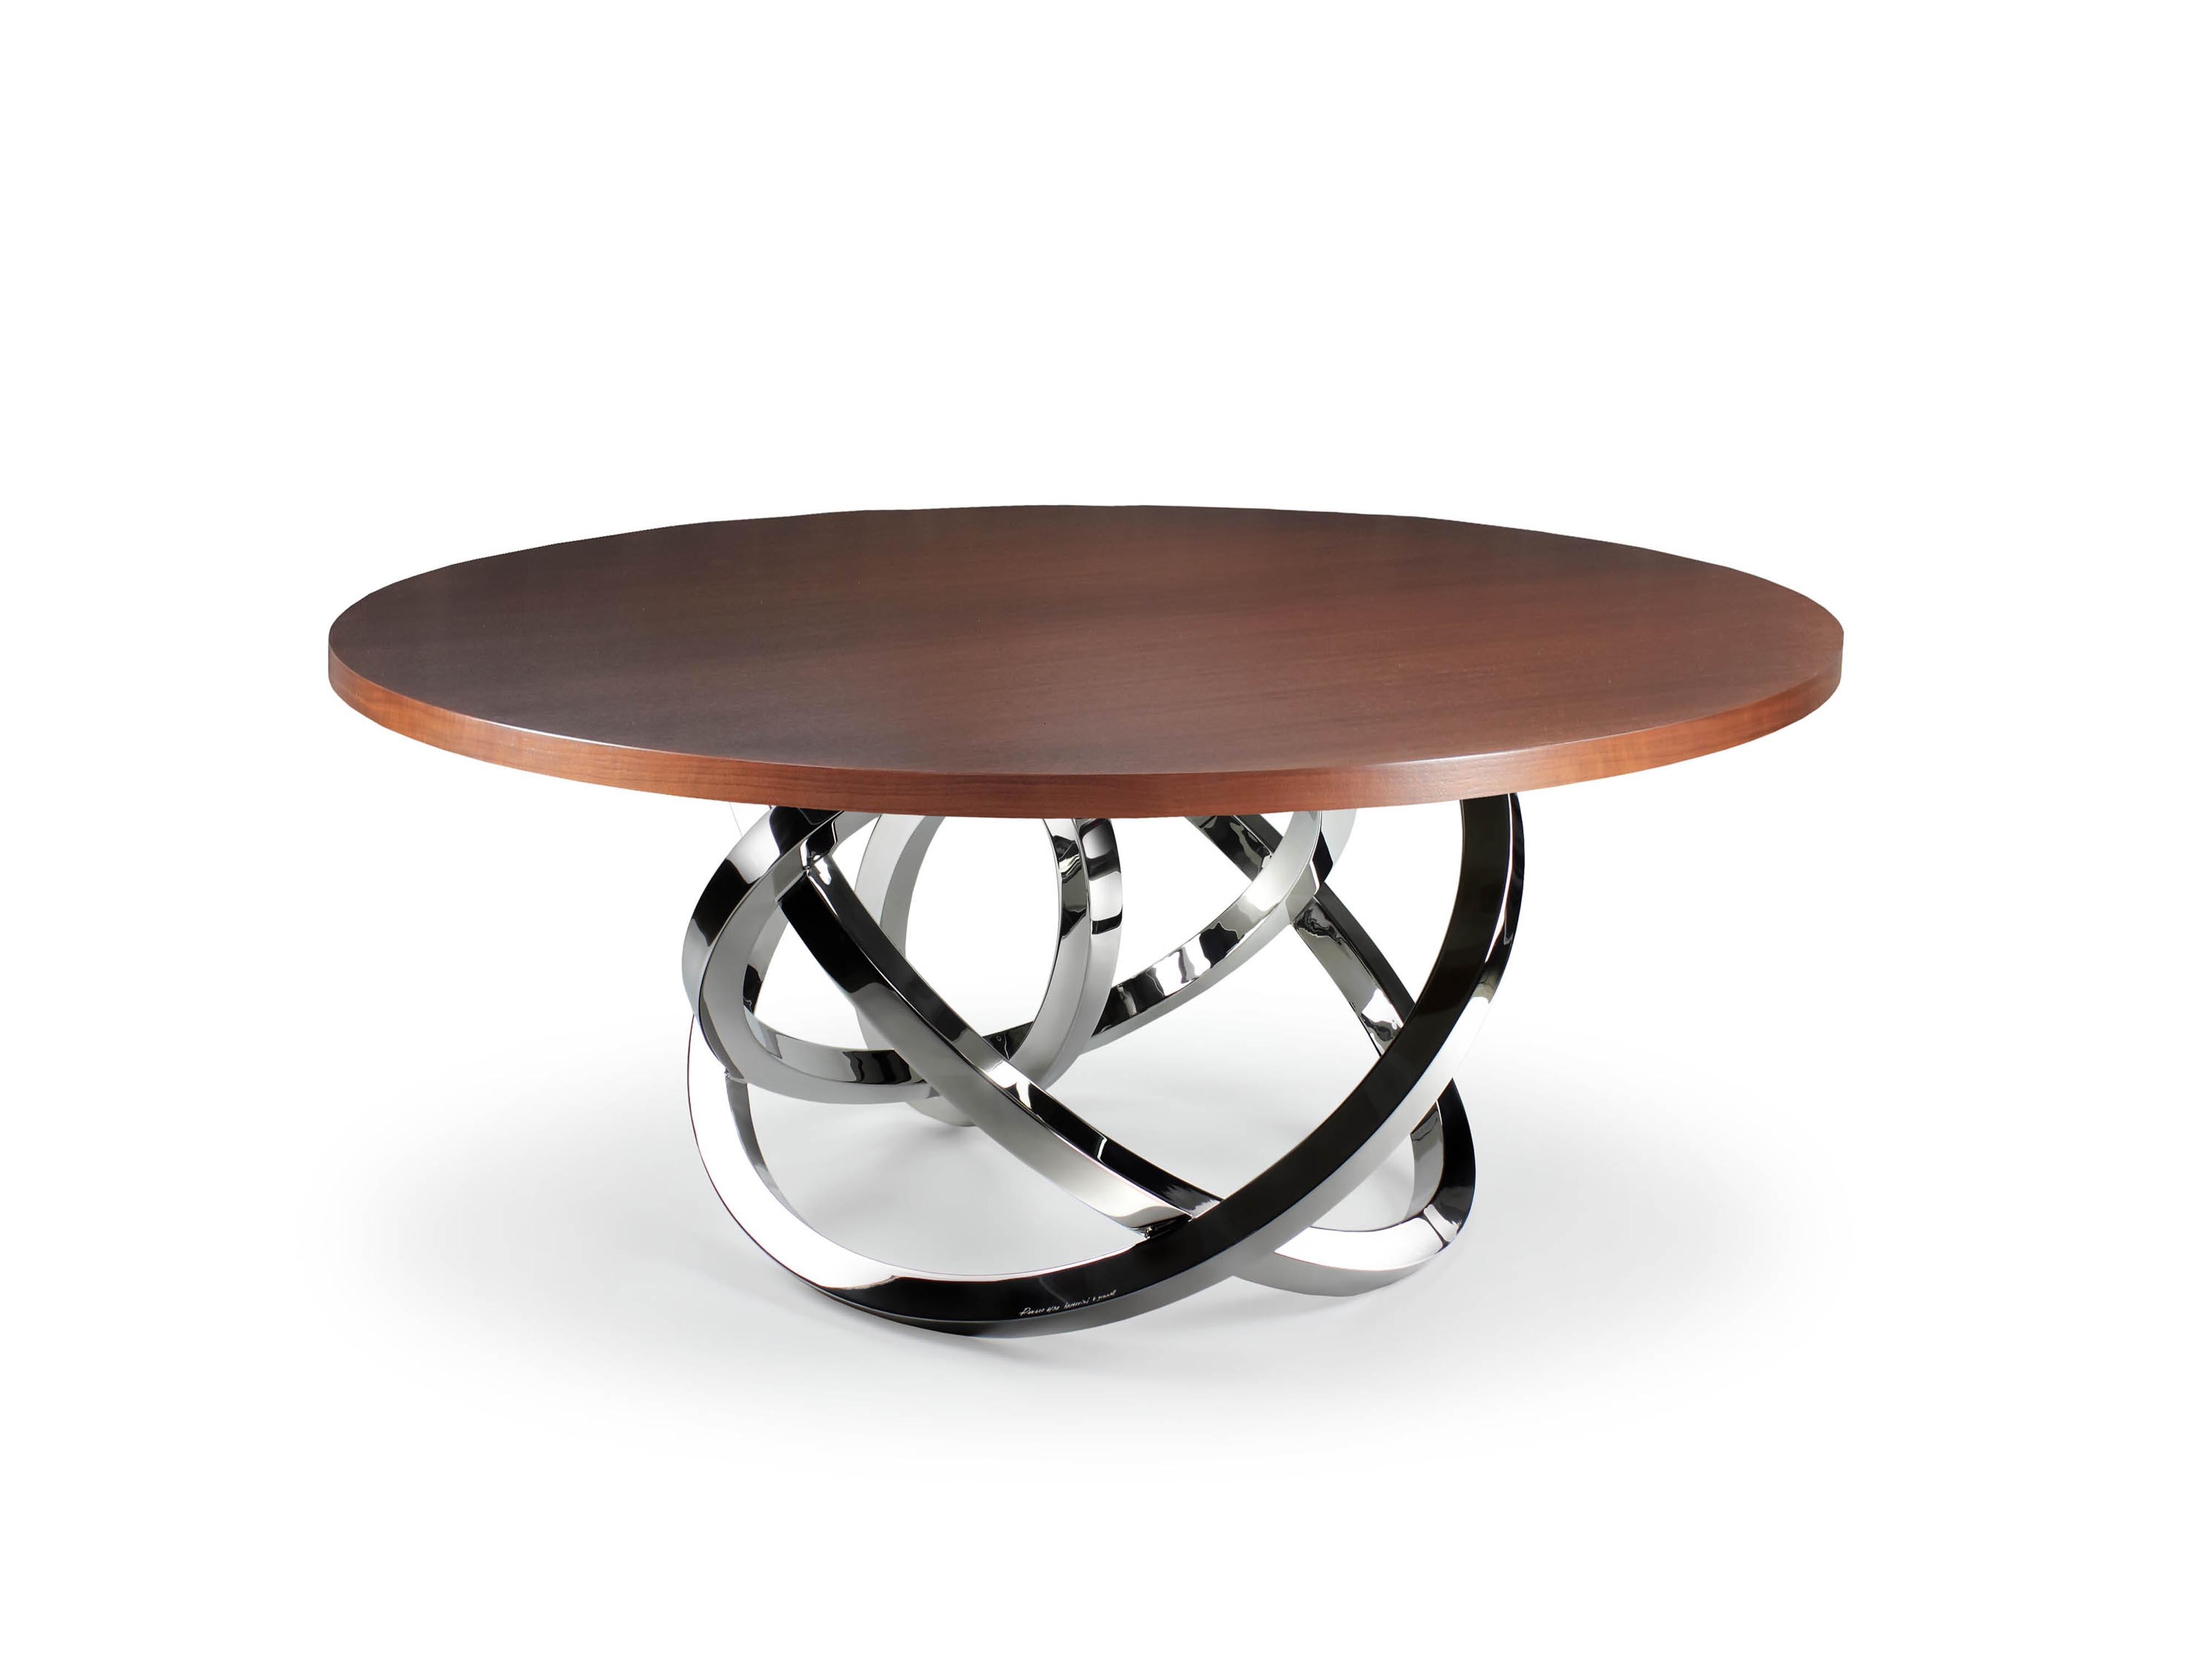 The sculptural table 'Perseo' is an eye-catching table with structure in mirror polished stainless steel and round table top in walnut wood. Every single bangle is welded and highly polished by hand. The mirror-like finishing of the steel creates